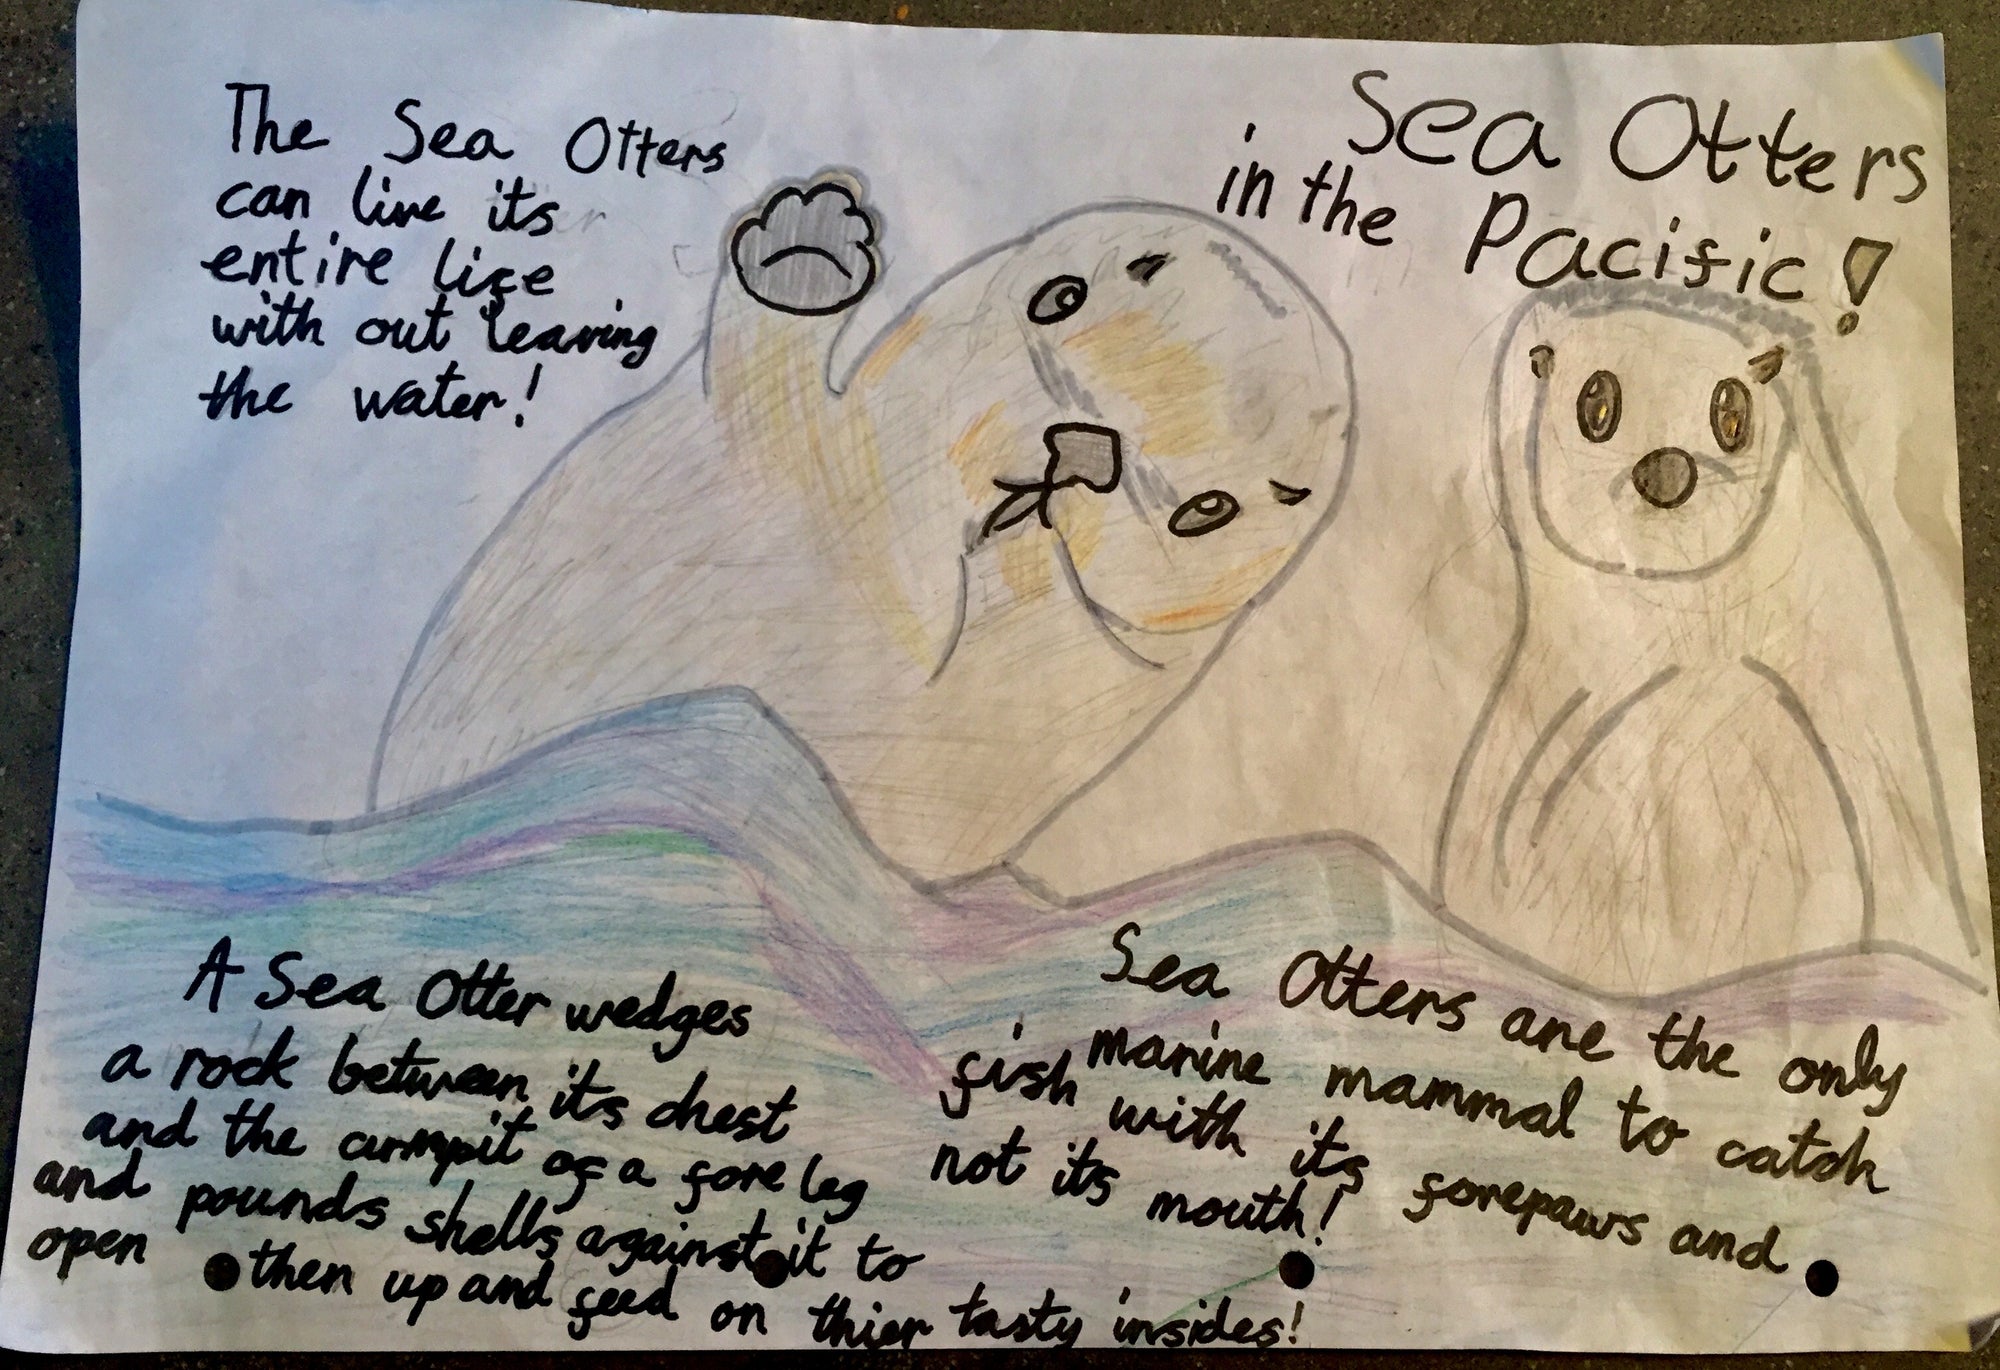 Pacific Ocean Creatures: Competition winners